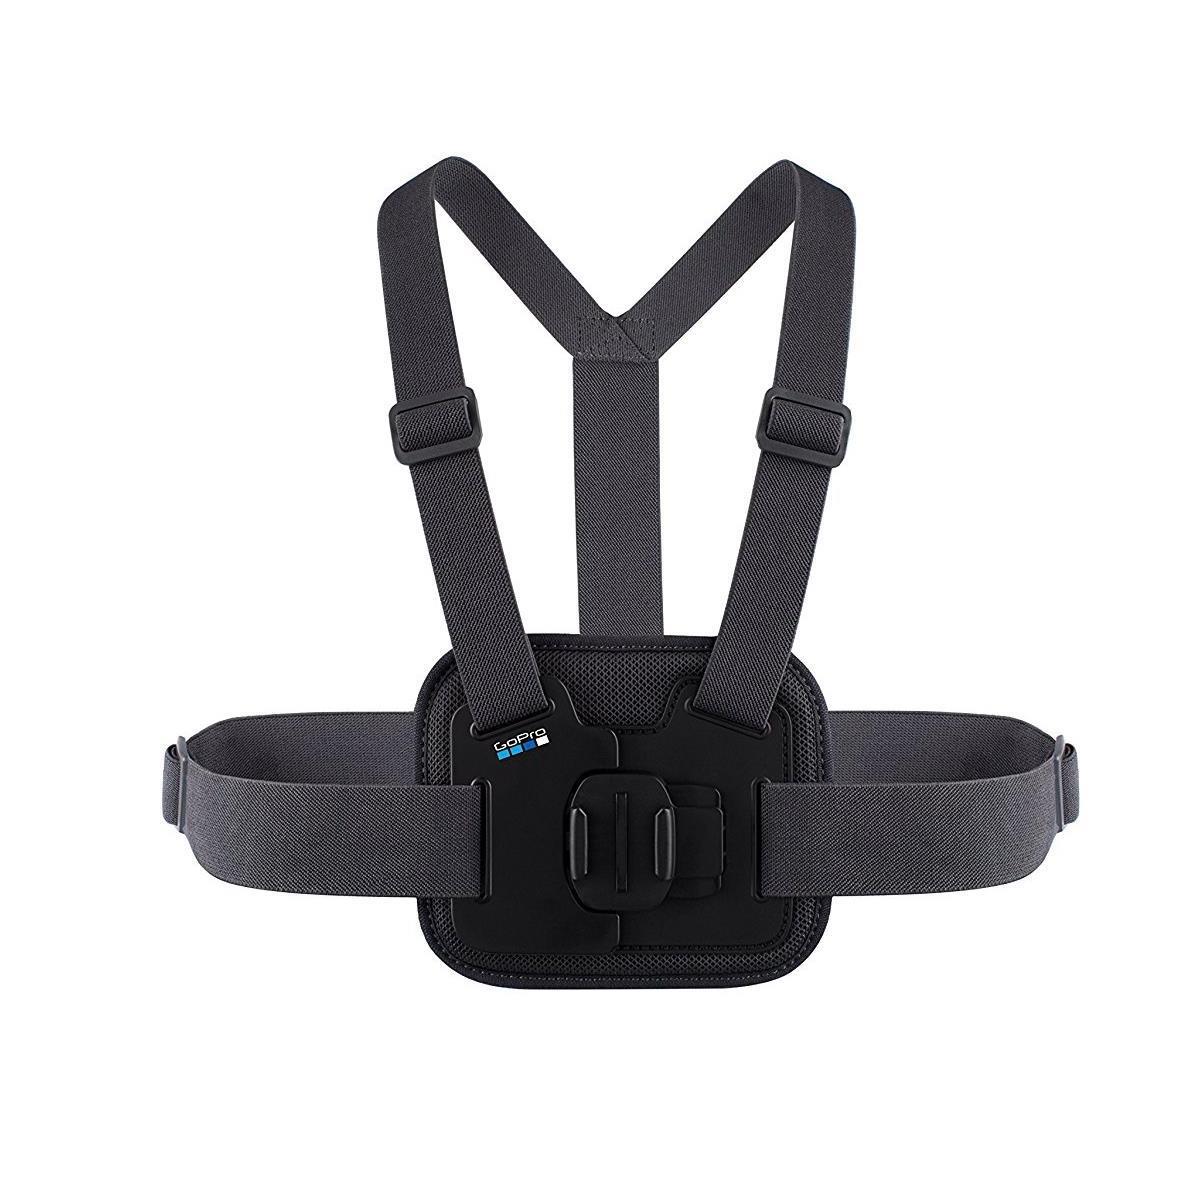 Image of GoPro Chesty Performance Chest Mount for HERO and MAX Cameras